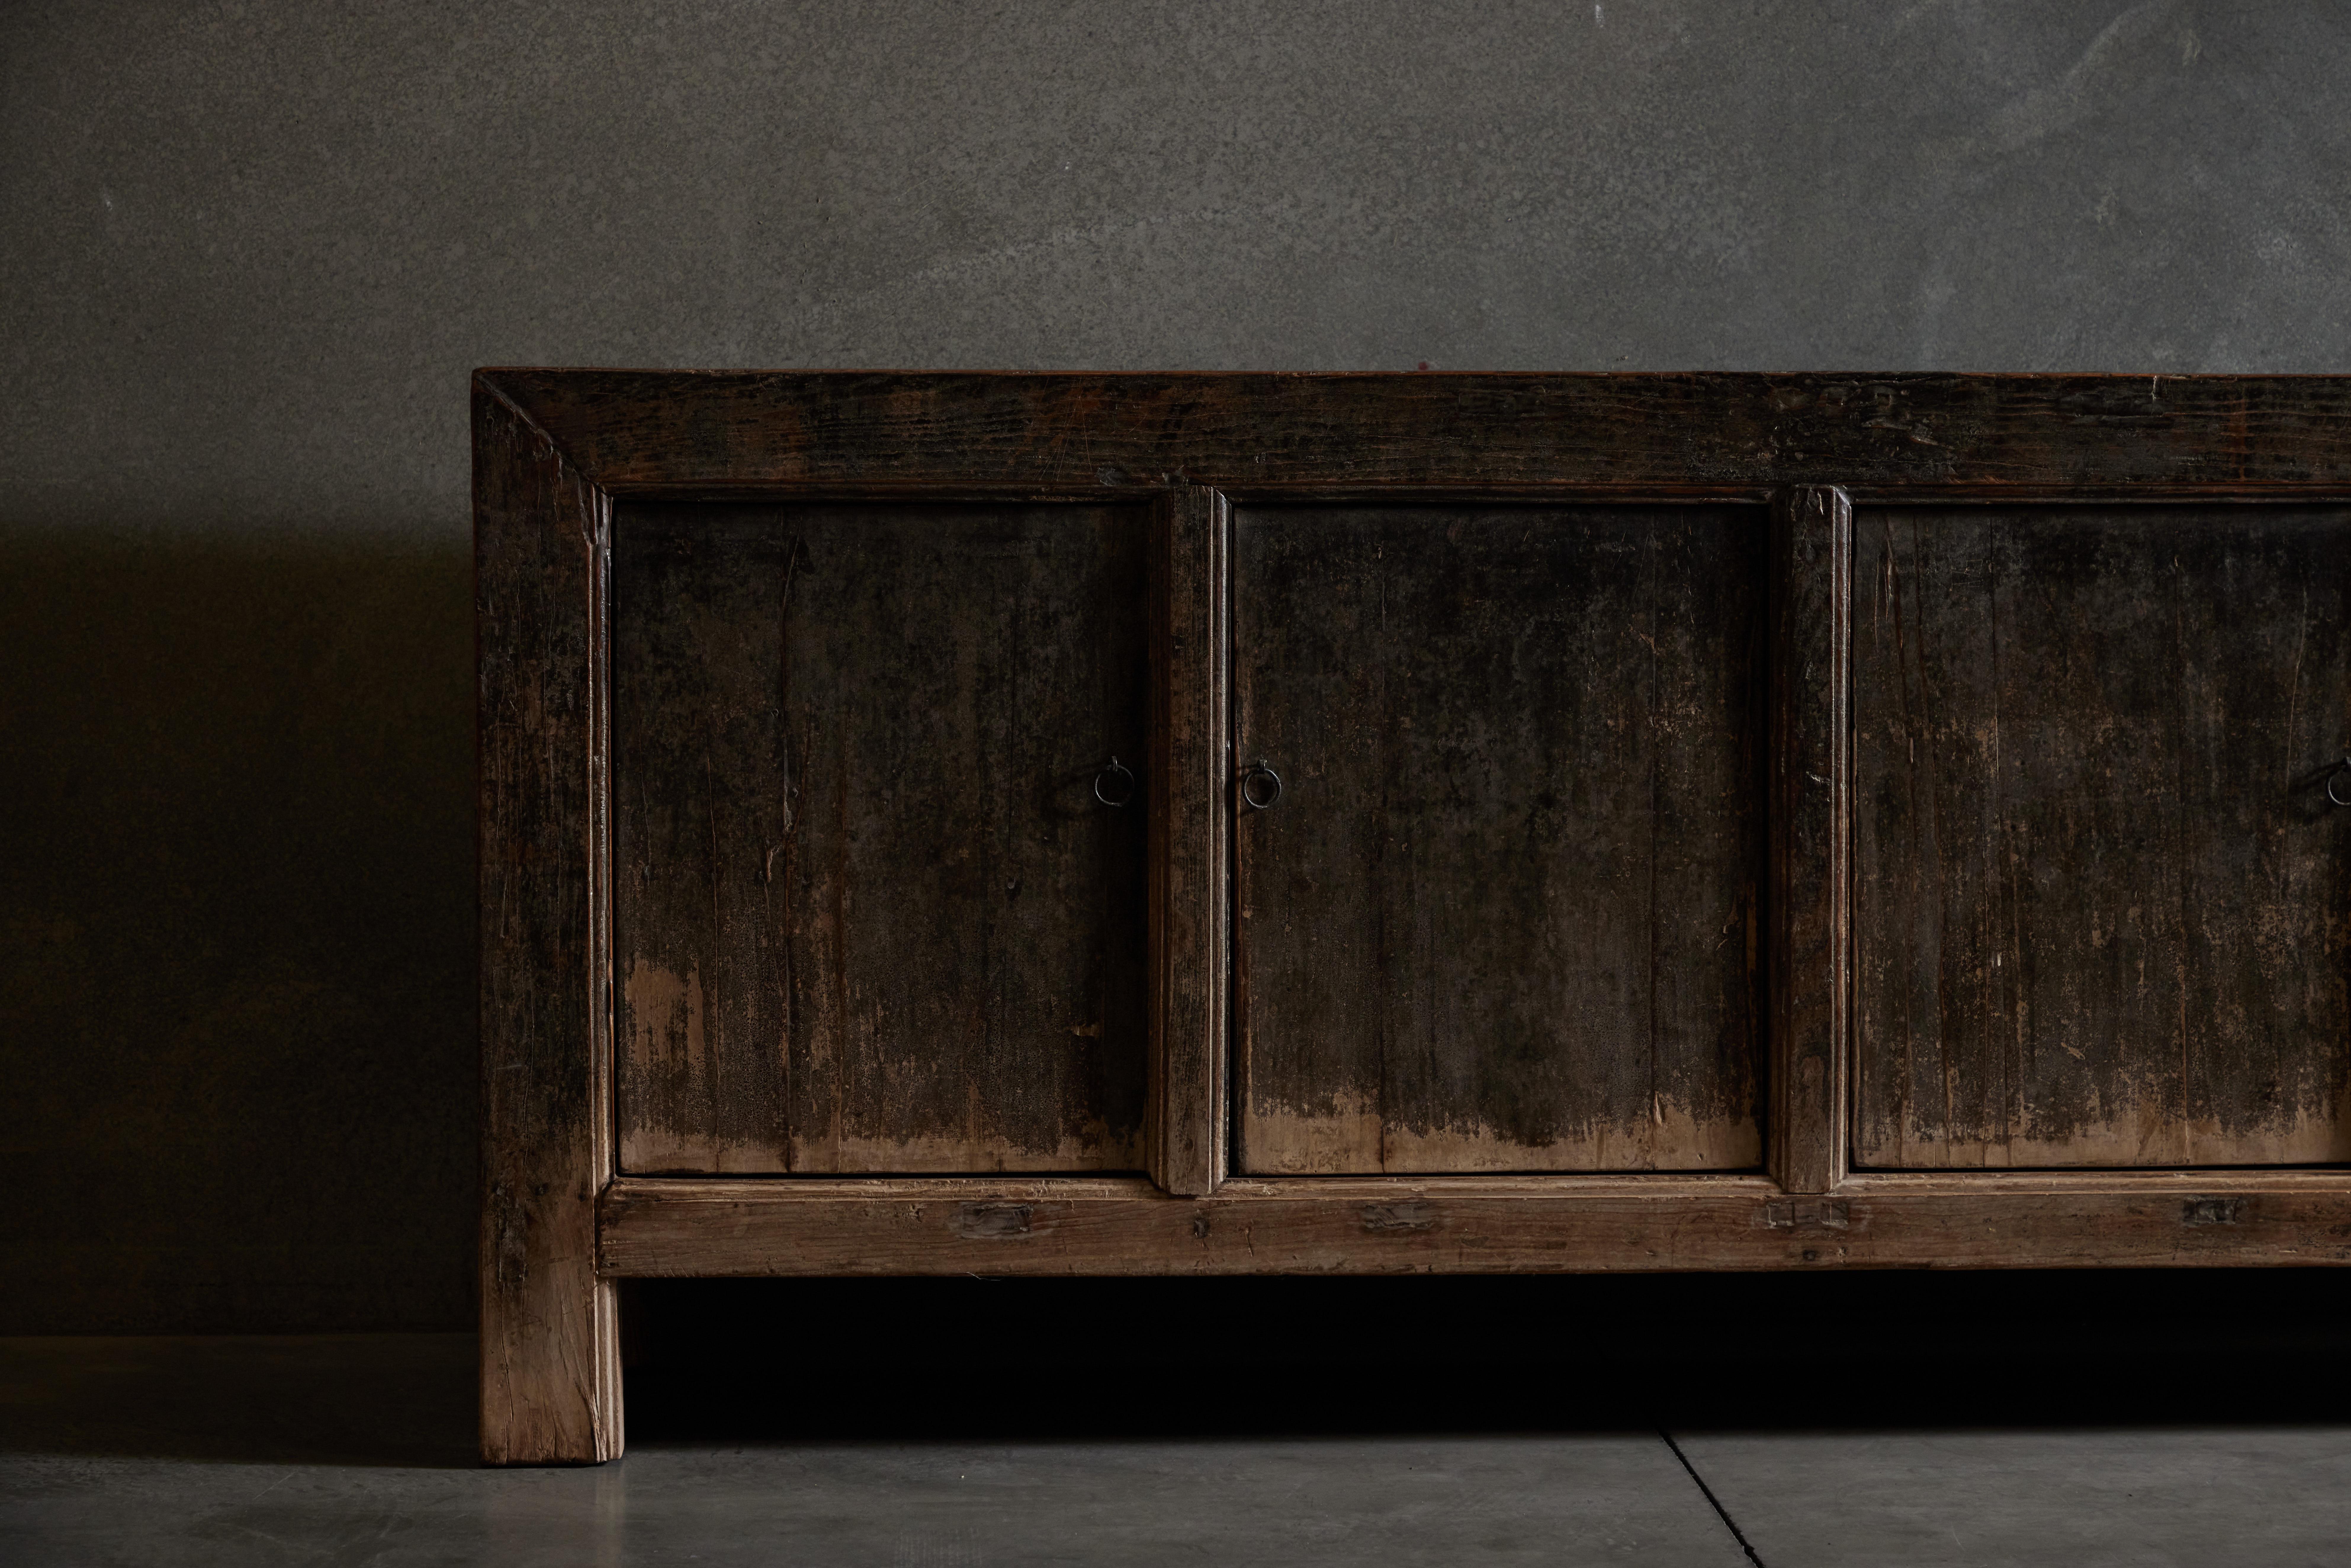 Chinese Patinated Wood Sideboard 1